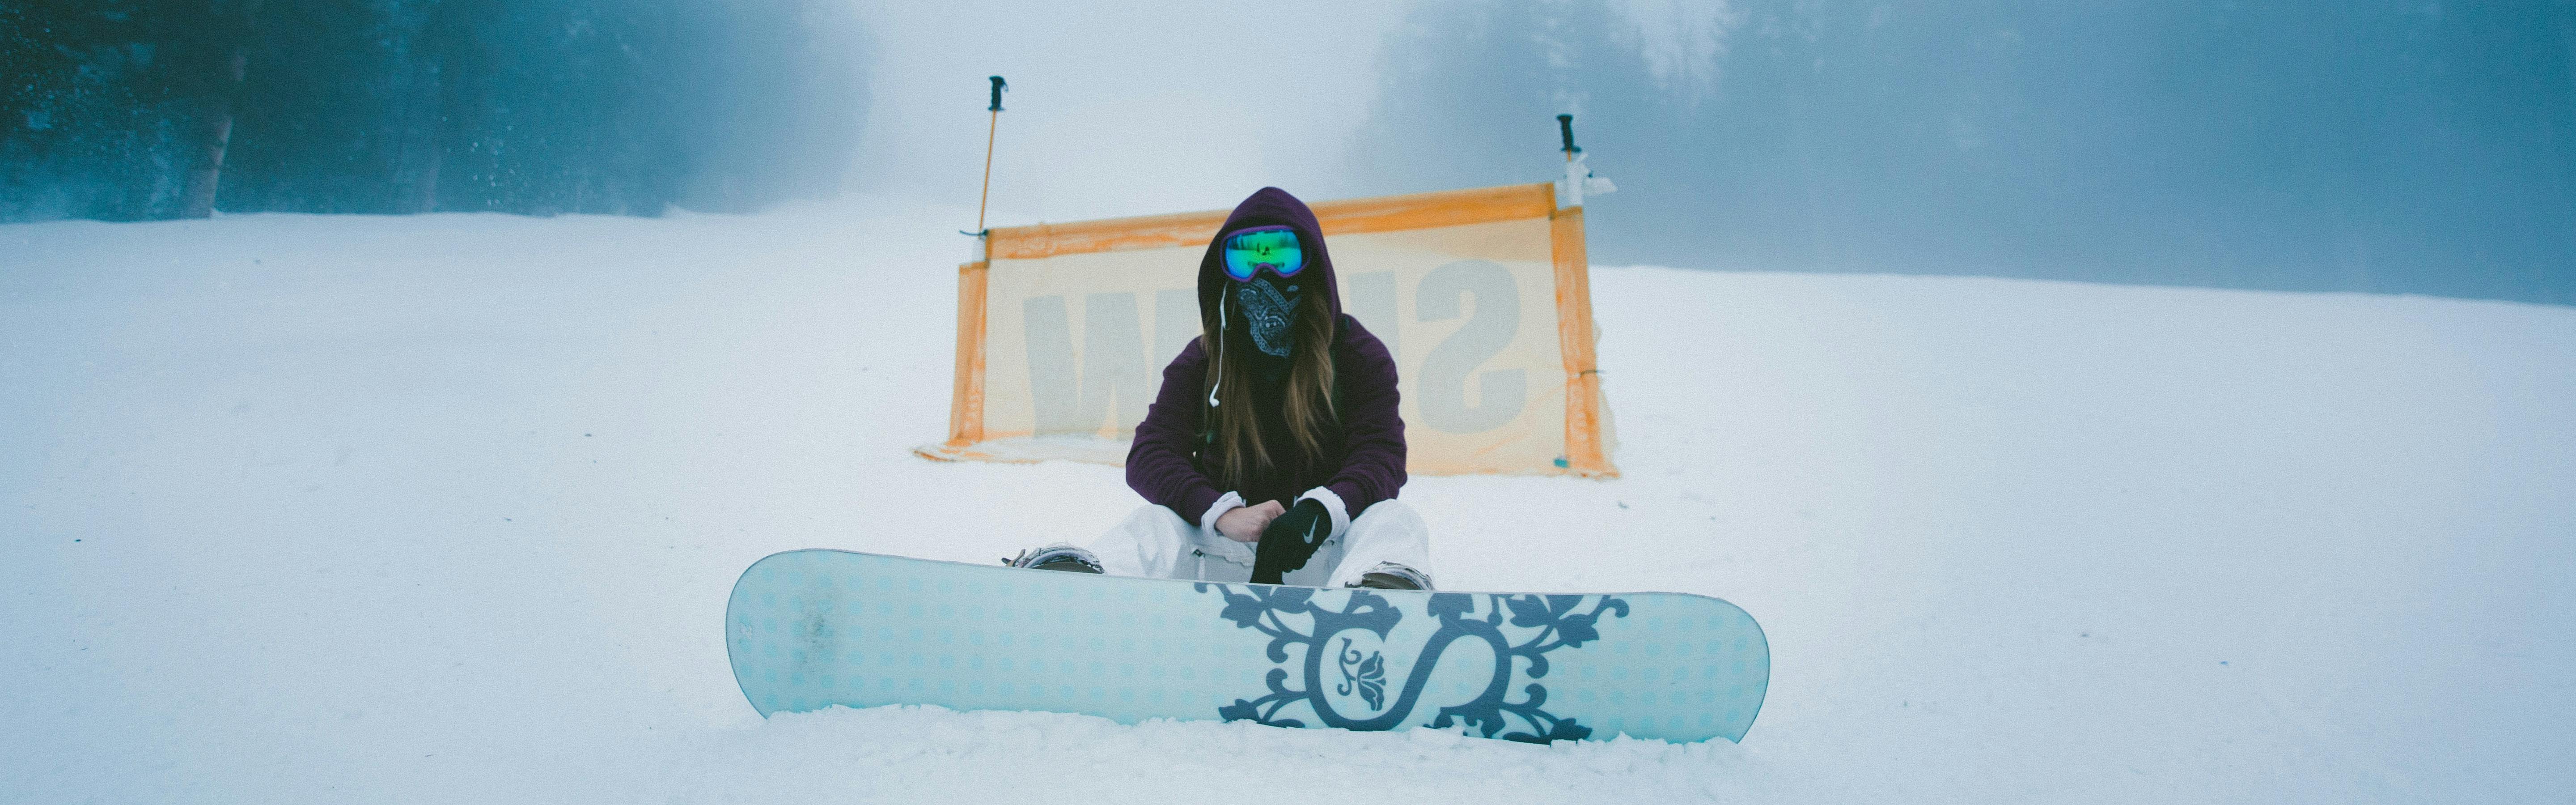 A snowboarder sits in the snow in front of a SLOW sign